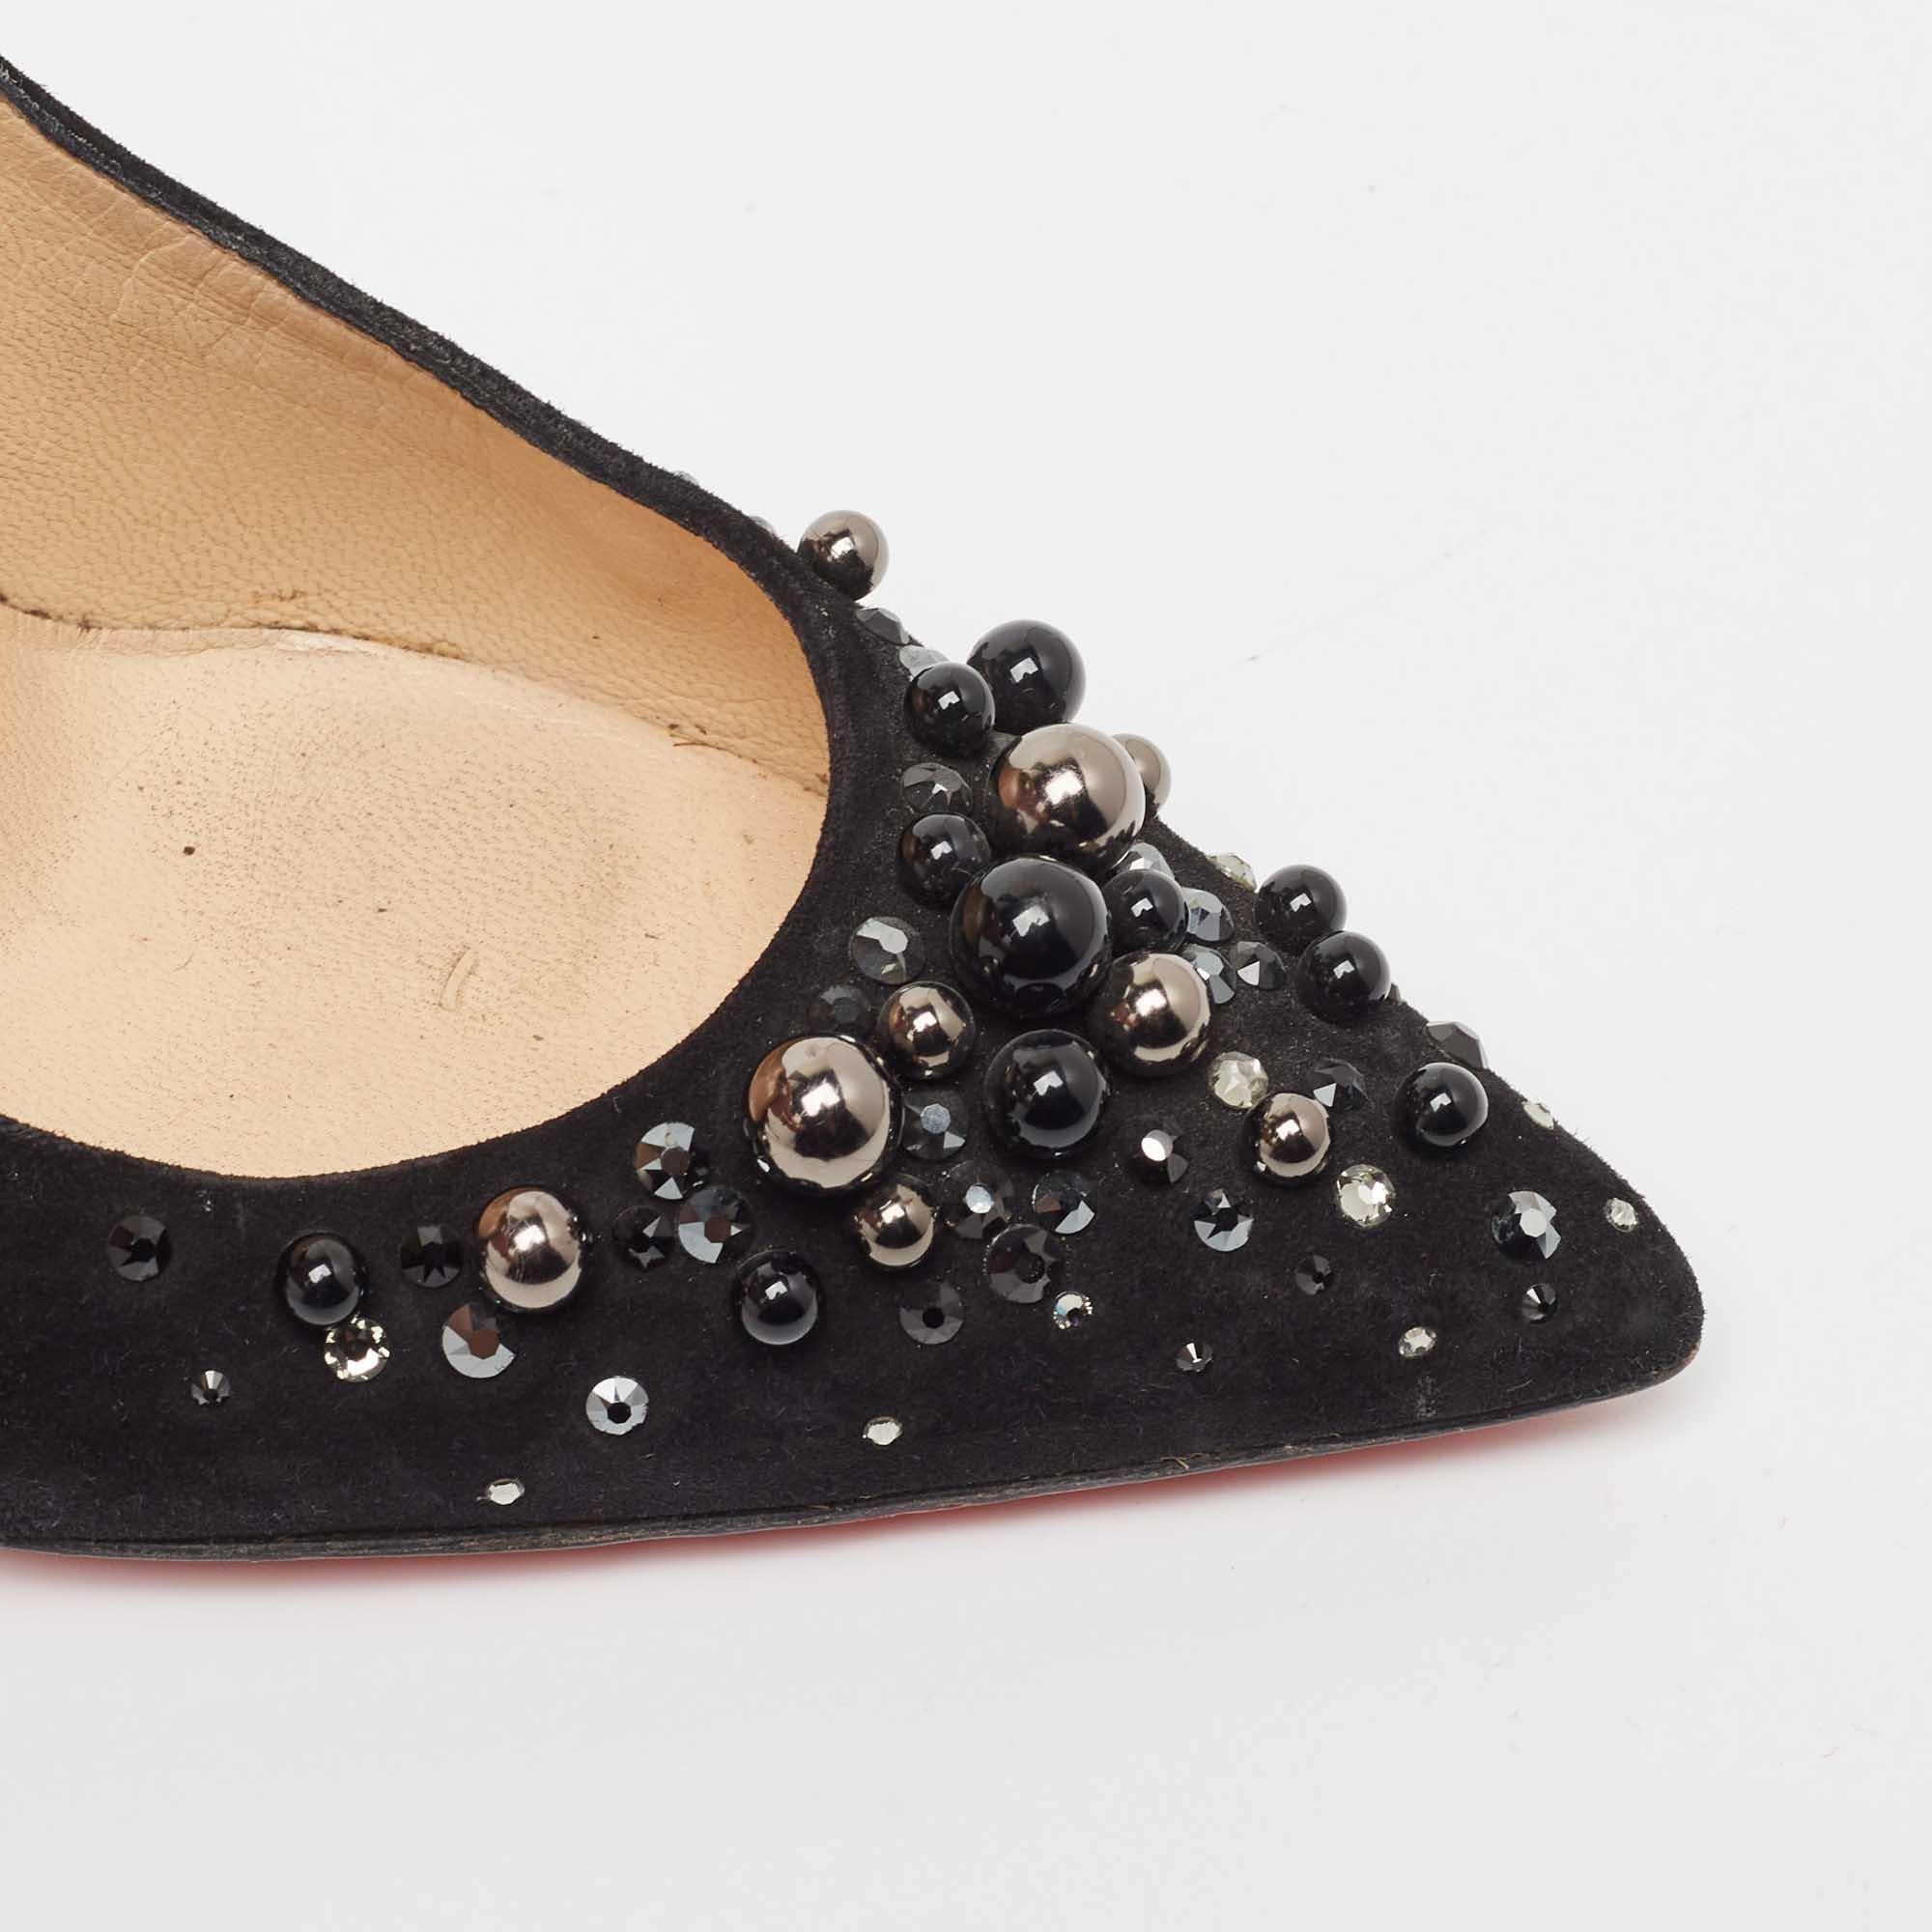 Christian Louboutin Black Suede Candidate Pumps Size 37 For Sale 4